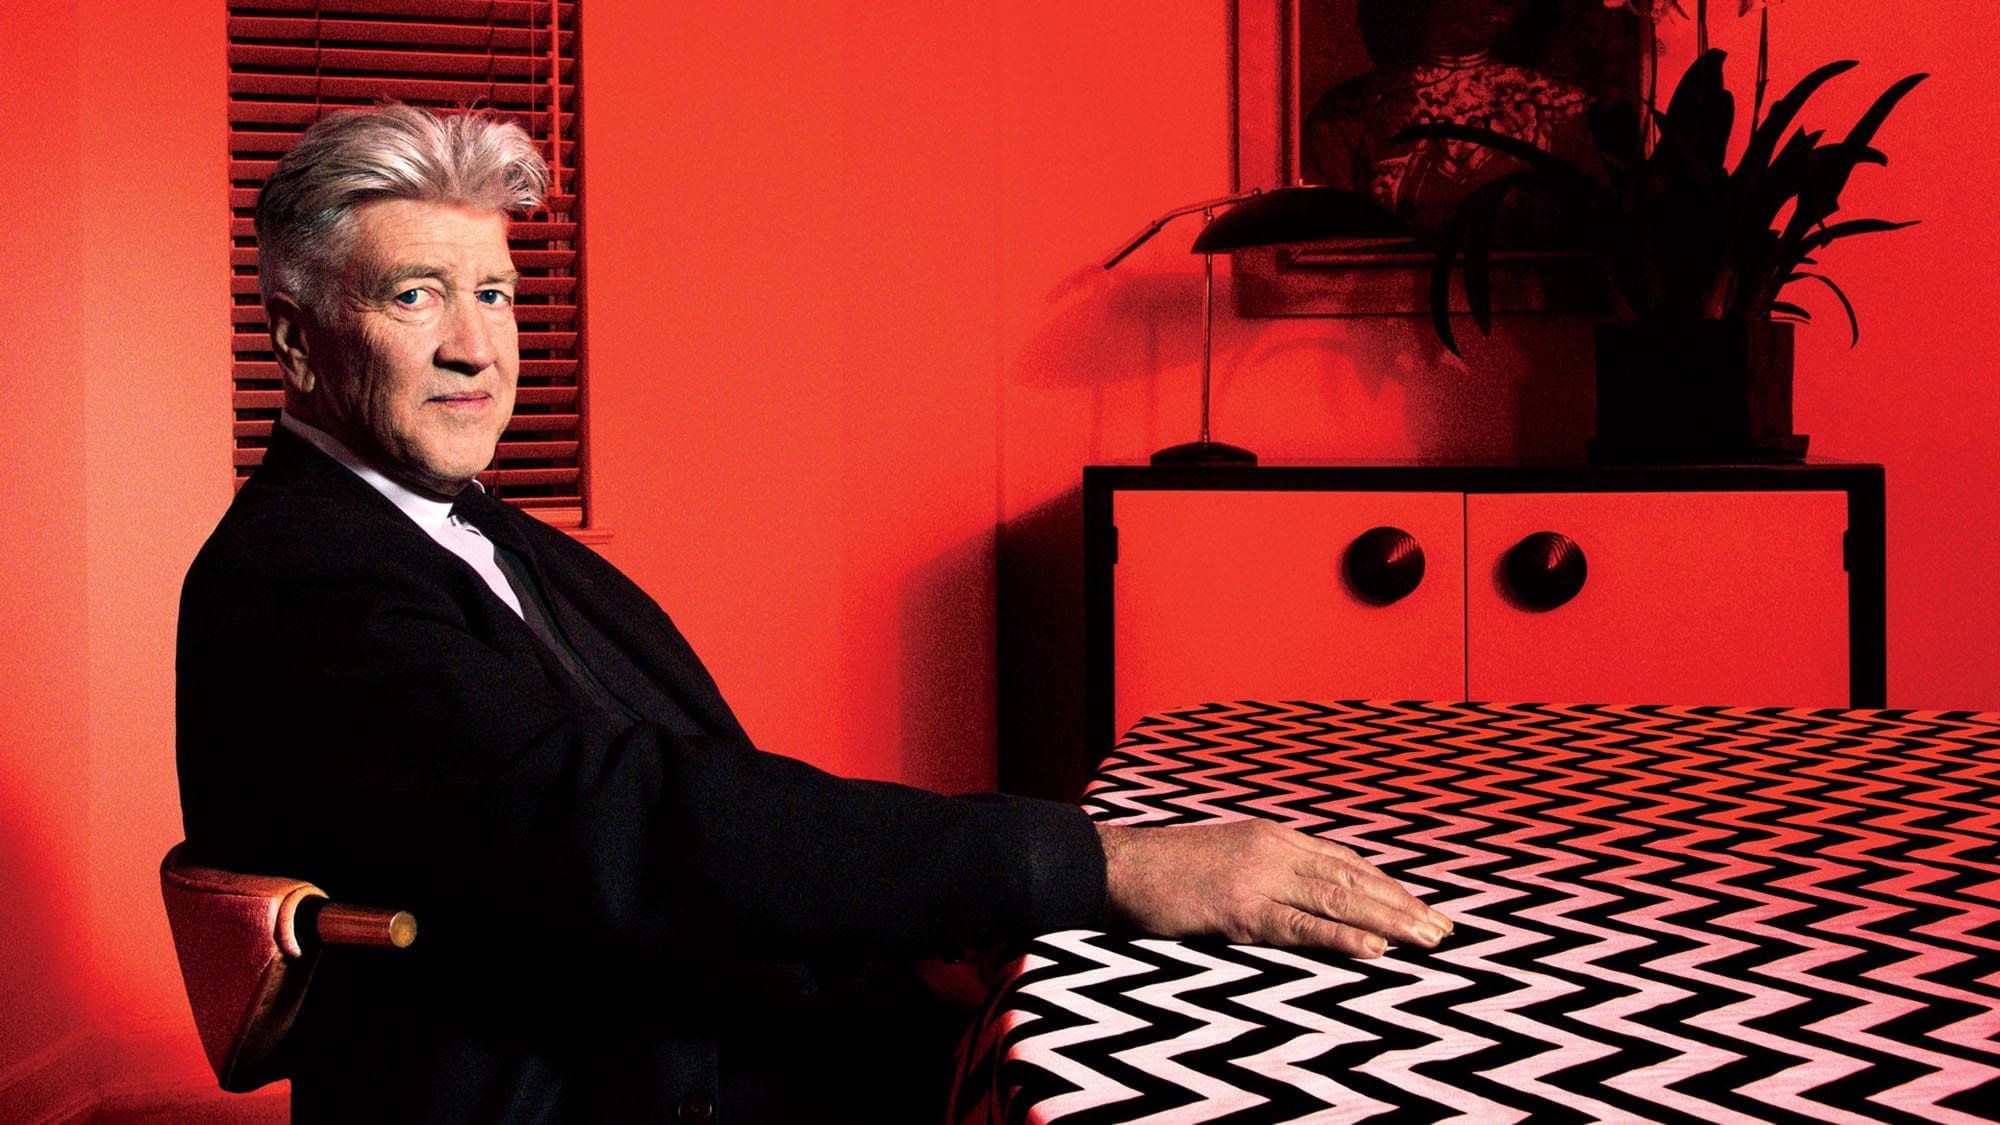 To celebrate the wit and wisdom from the genius brains behind 'Twin Peaks', 'Mulholland Drive', 'Blue Velvet', and 'Wild at Heart', here are David Lynch’s ten most inspiring pearls of wisdom.